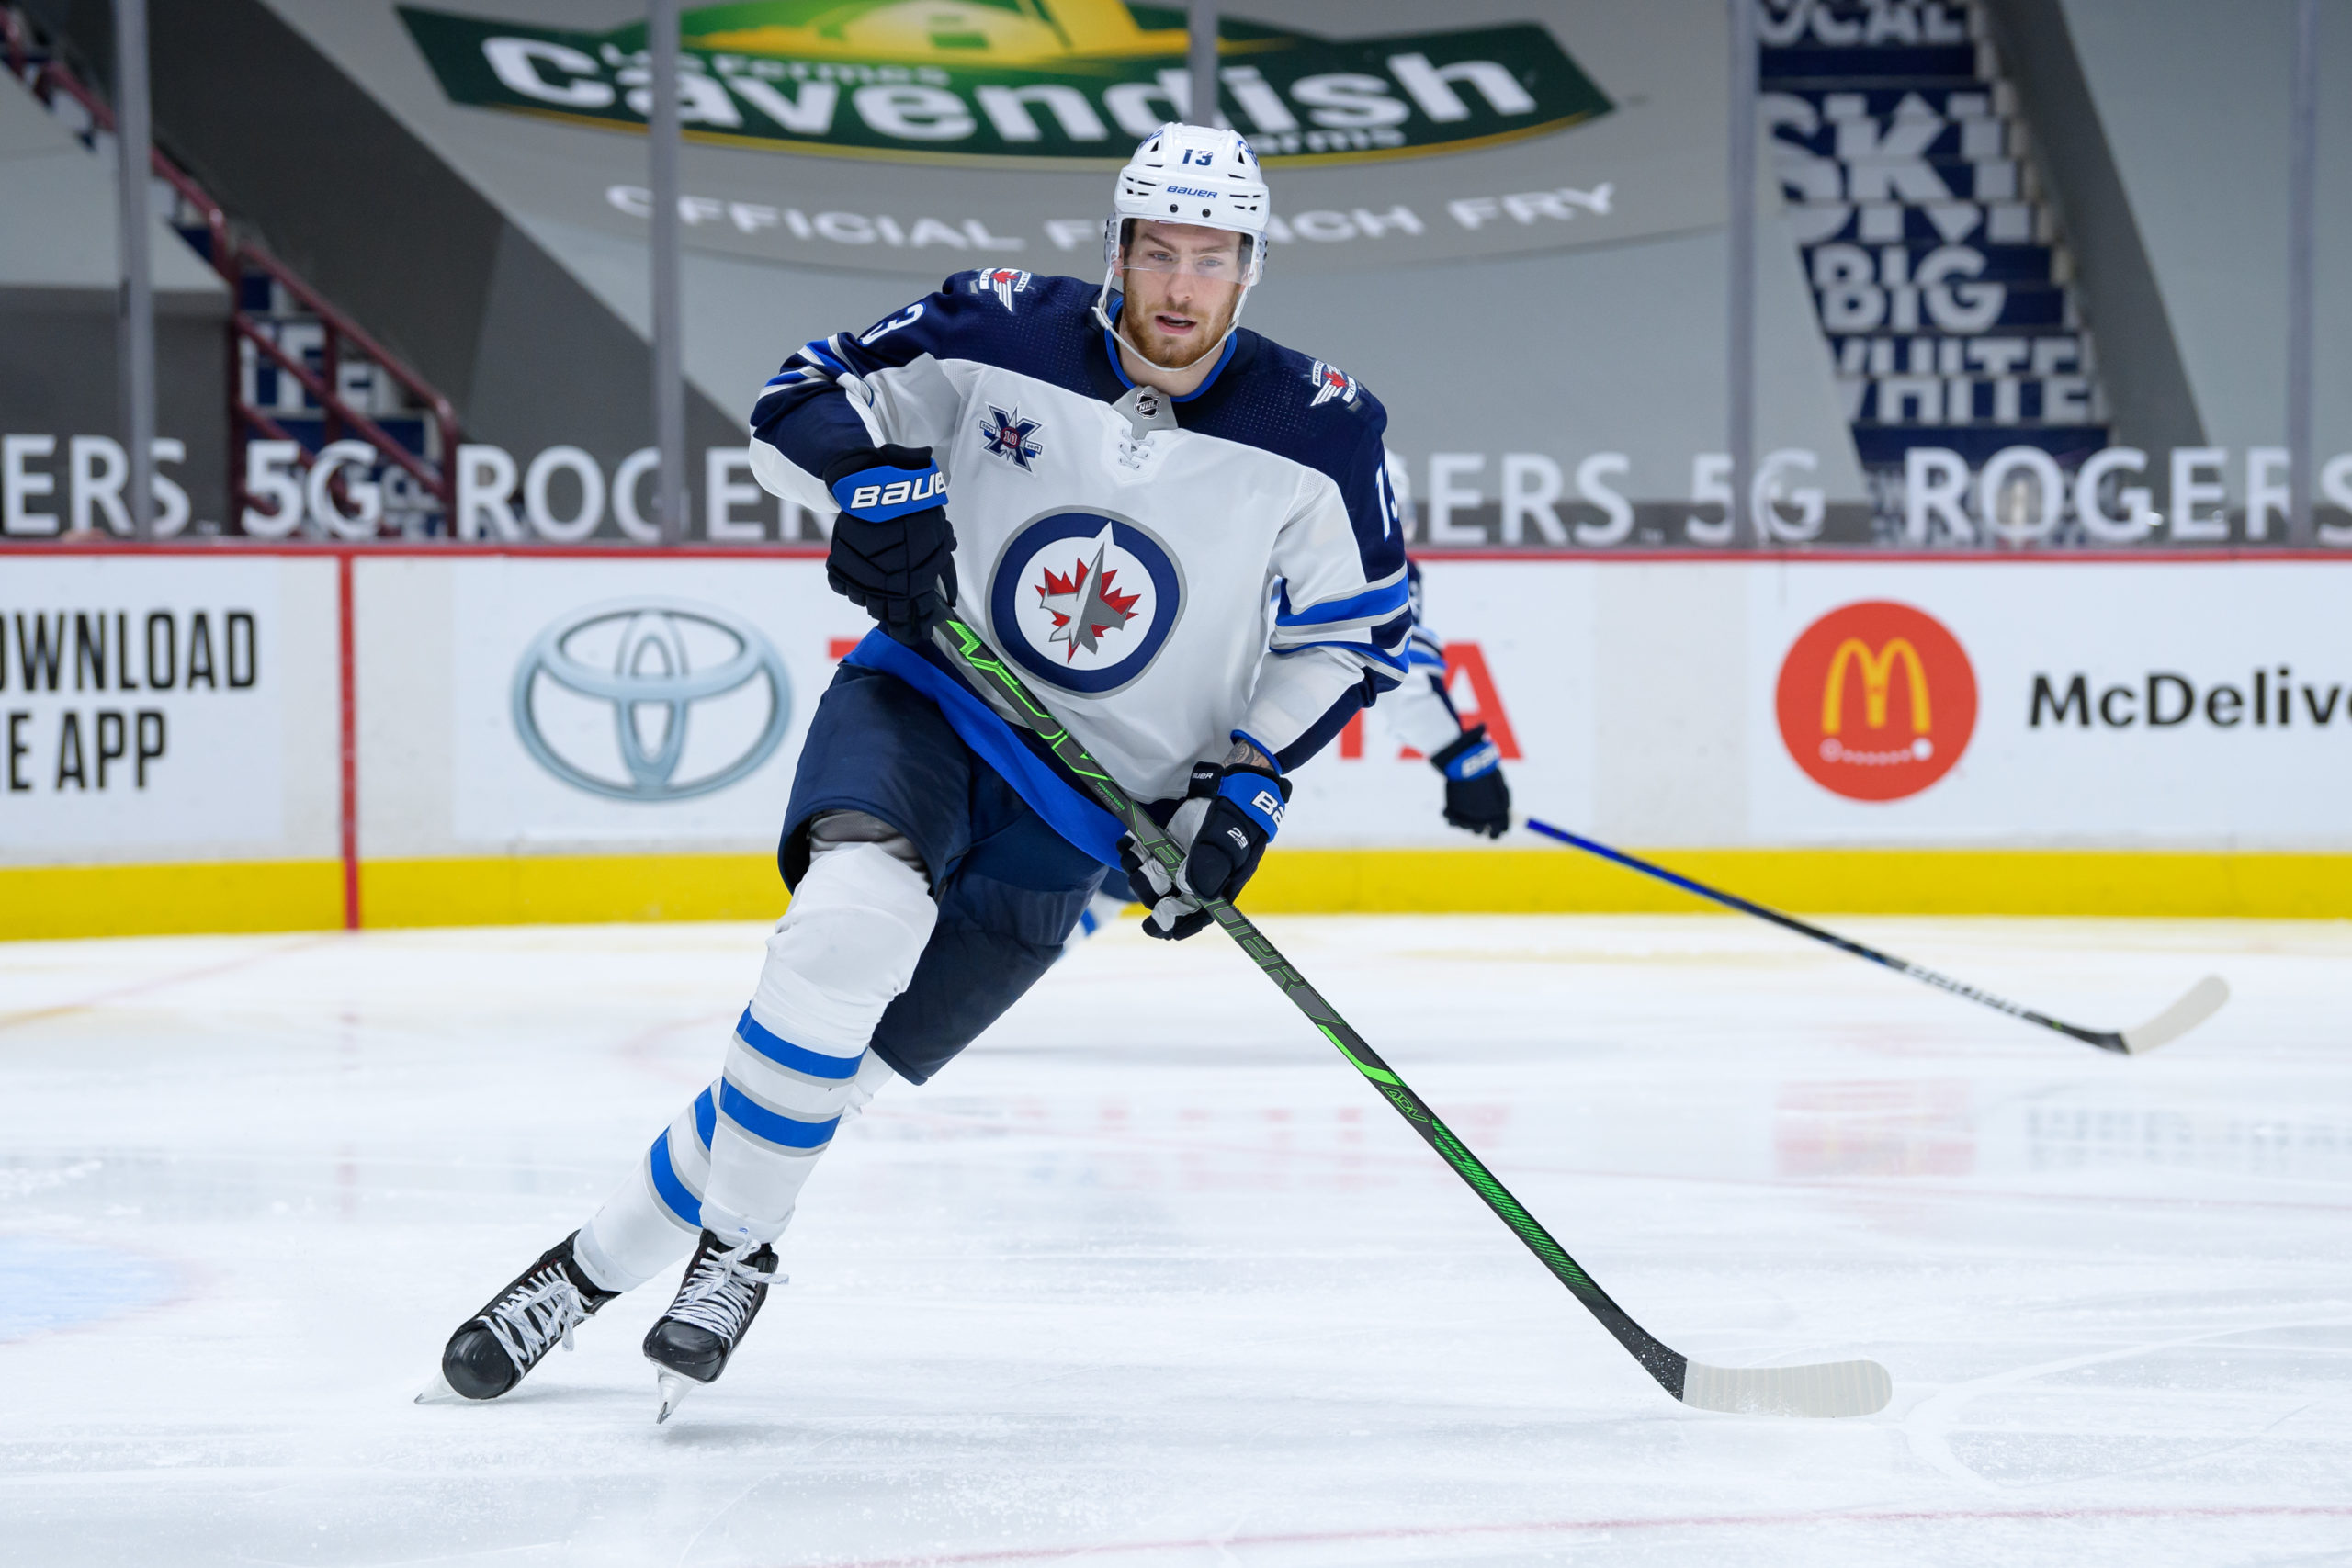 Kings acquire center Pierre-Luc Dubois in sign-and-trade with Jets